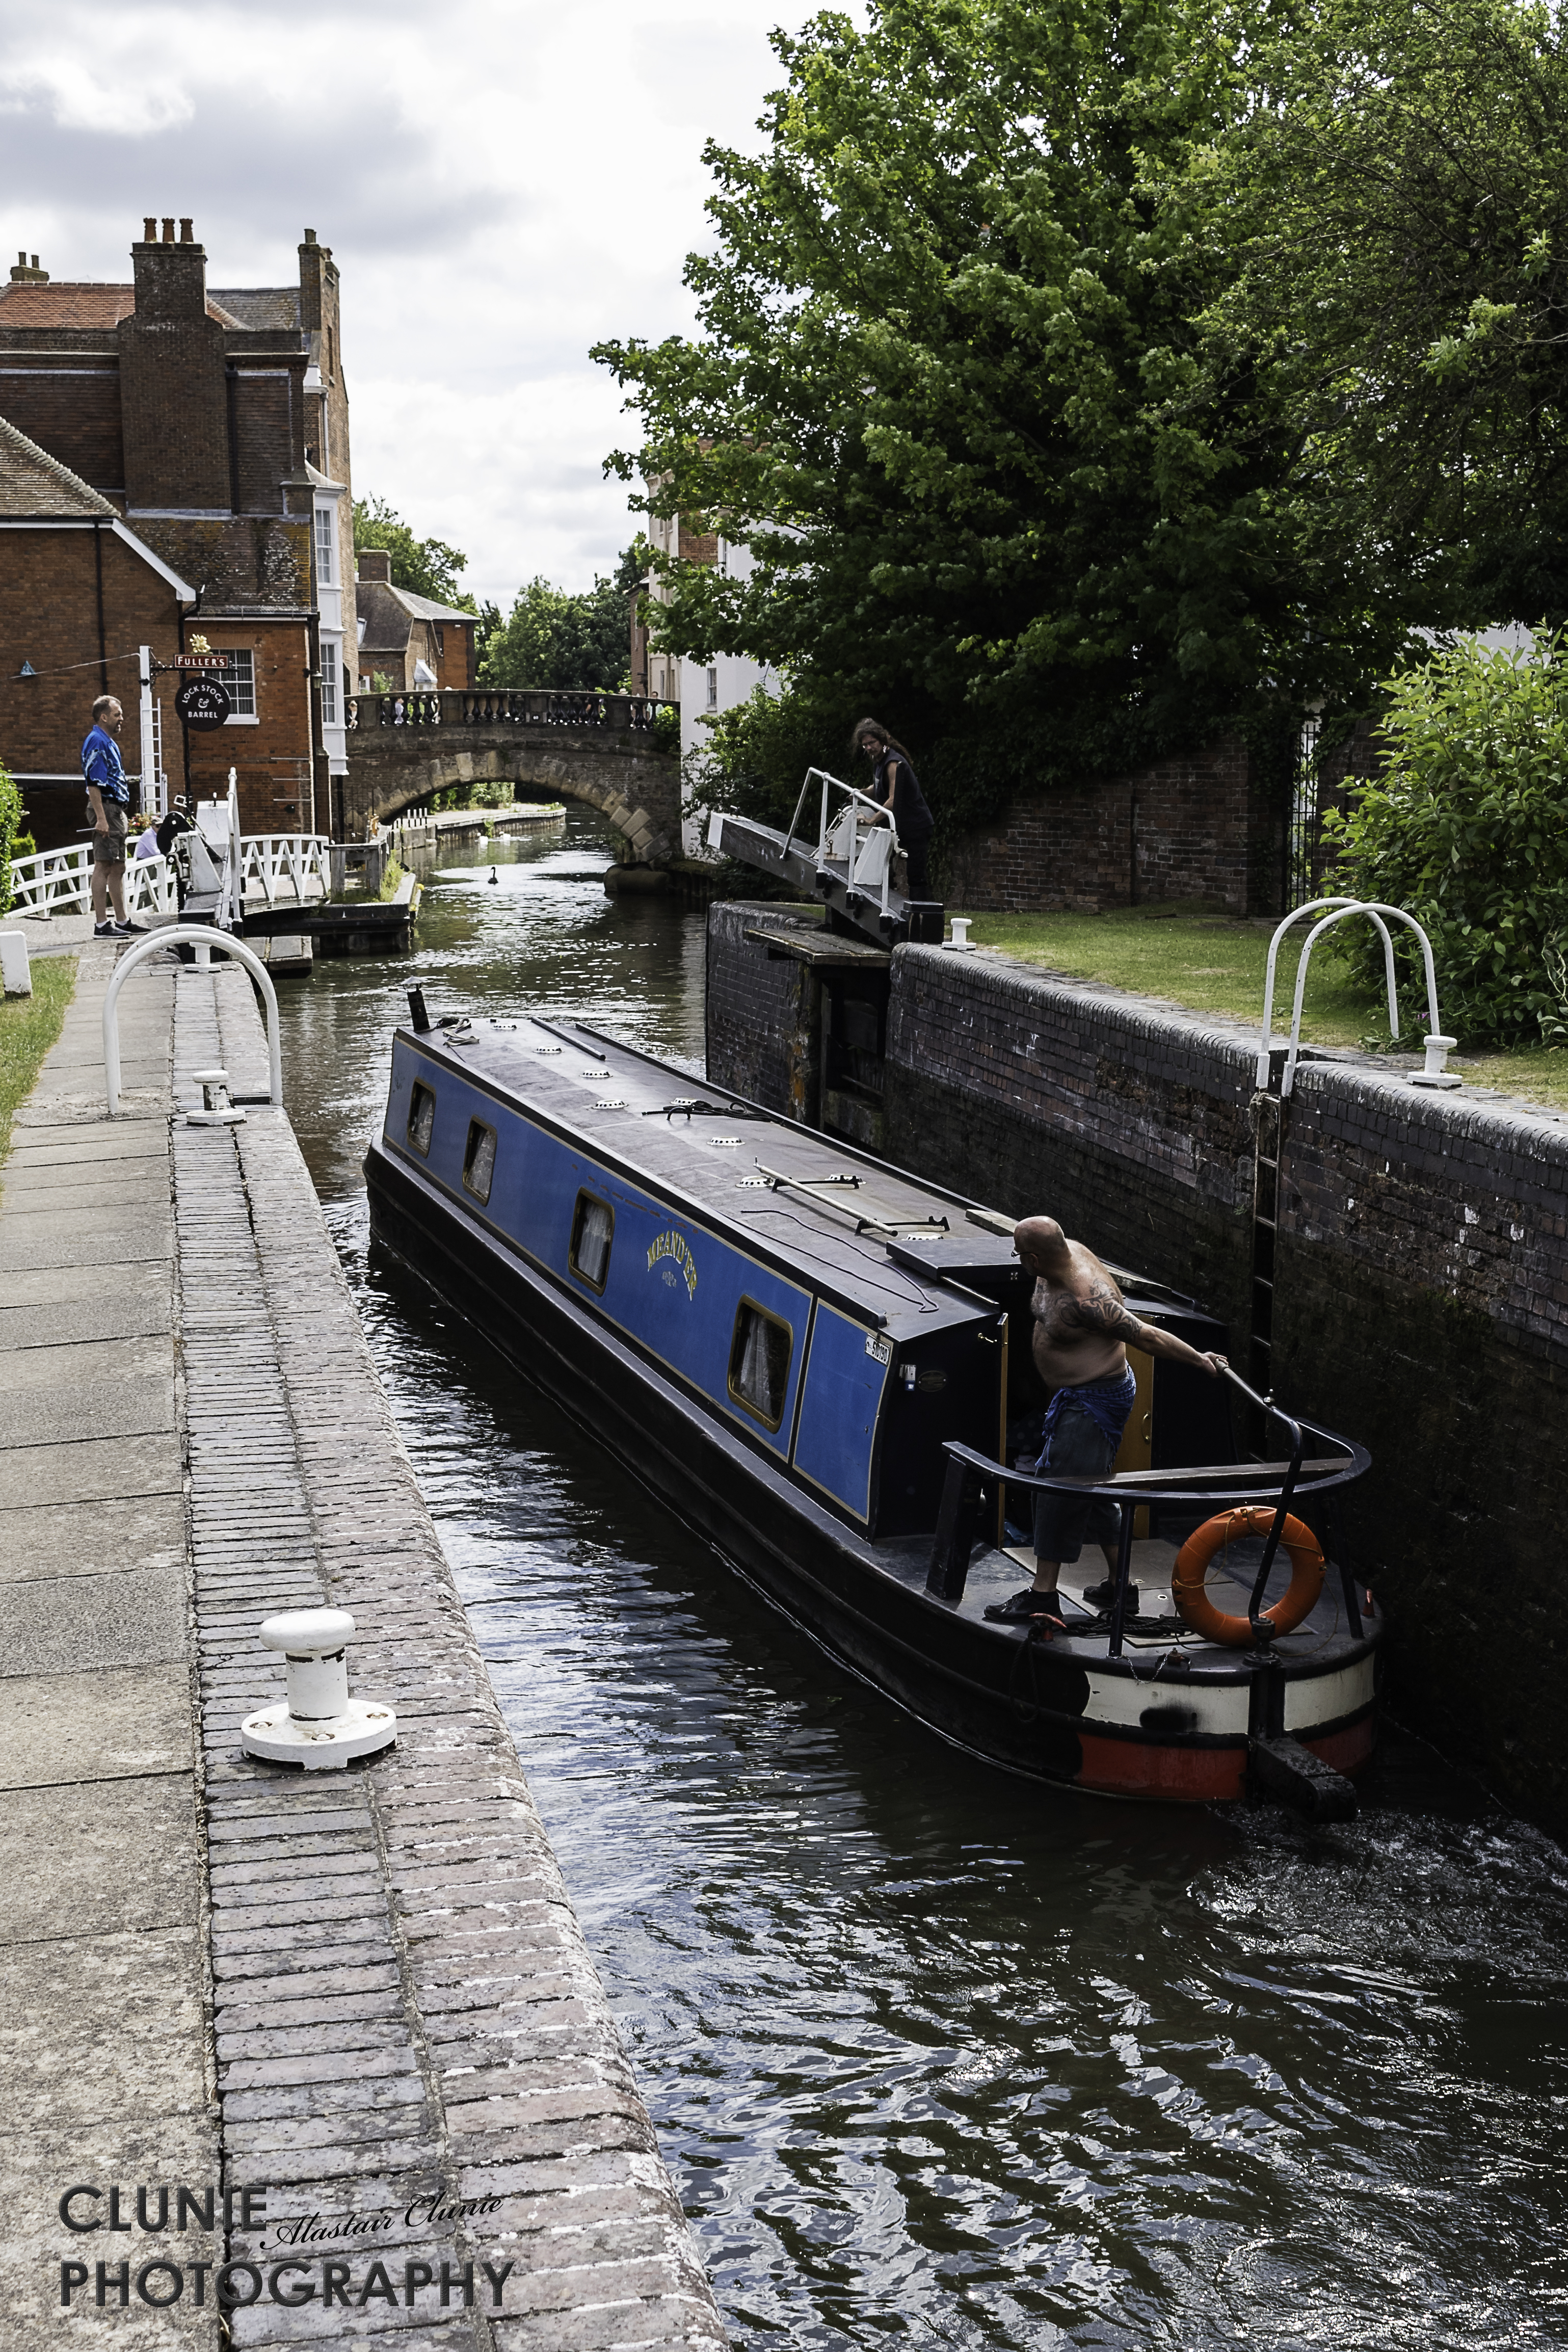 The Kennet and Avon canal, Newbury